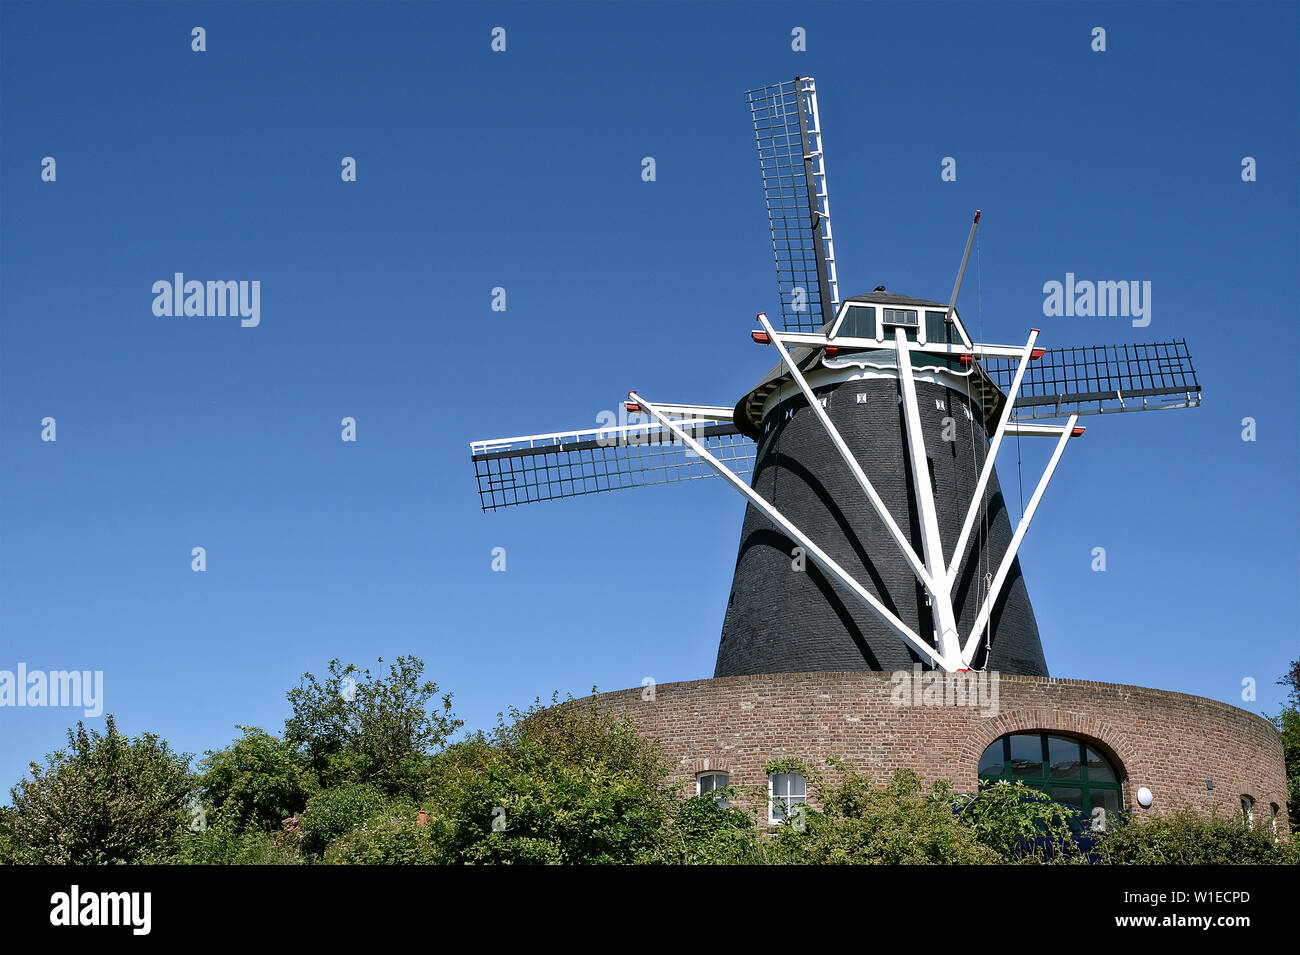 Op de Vrouweheide, a windmill on the Vrouwenheide south of Ubachsberg, Voerendaal, in the Dutch province of Limburg. Stock Photo